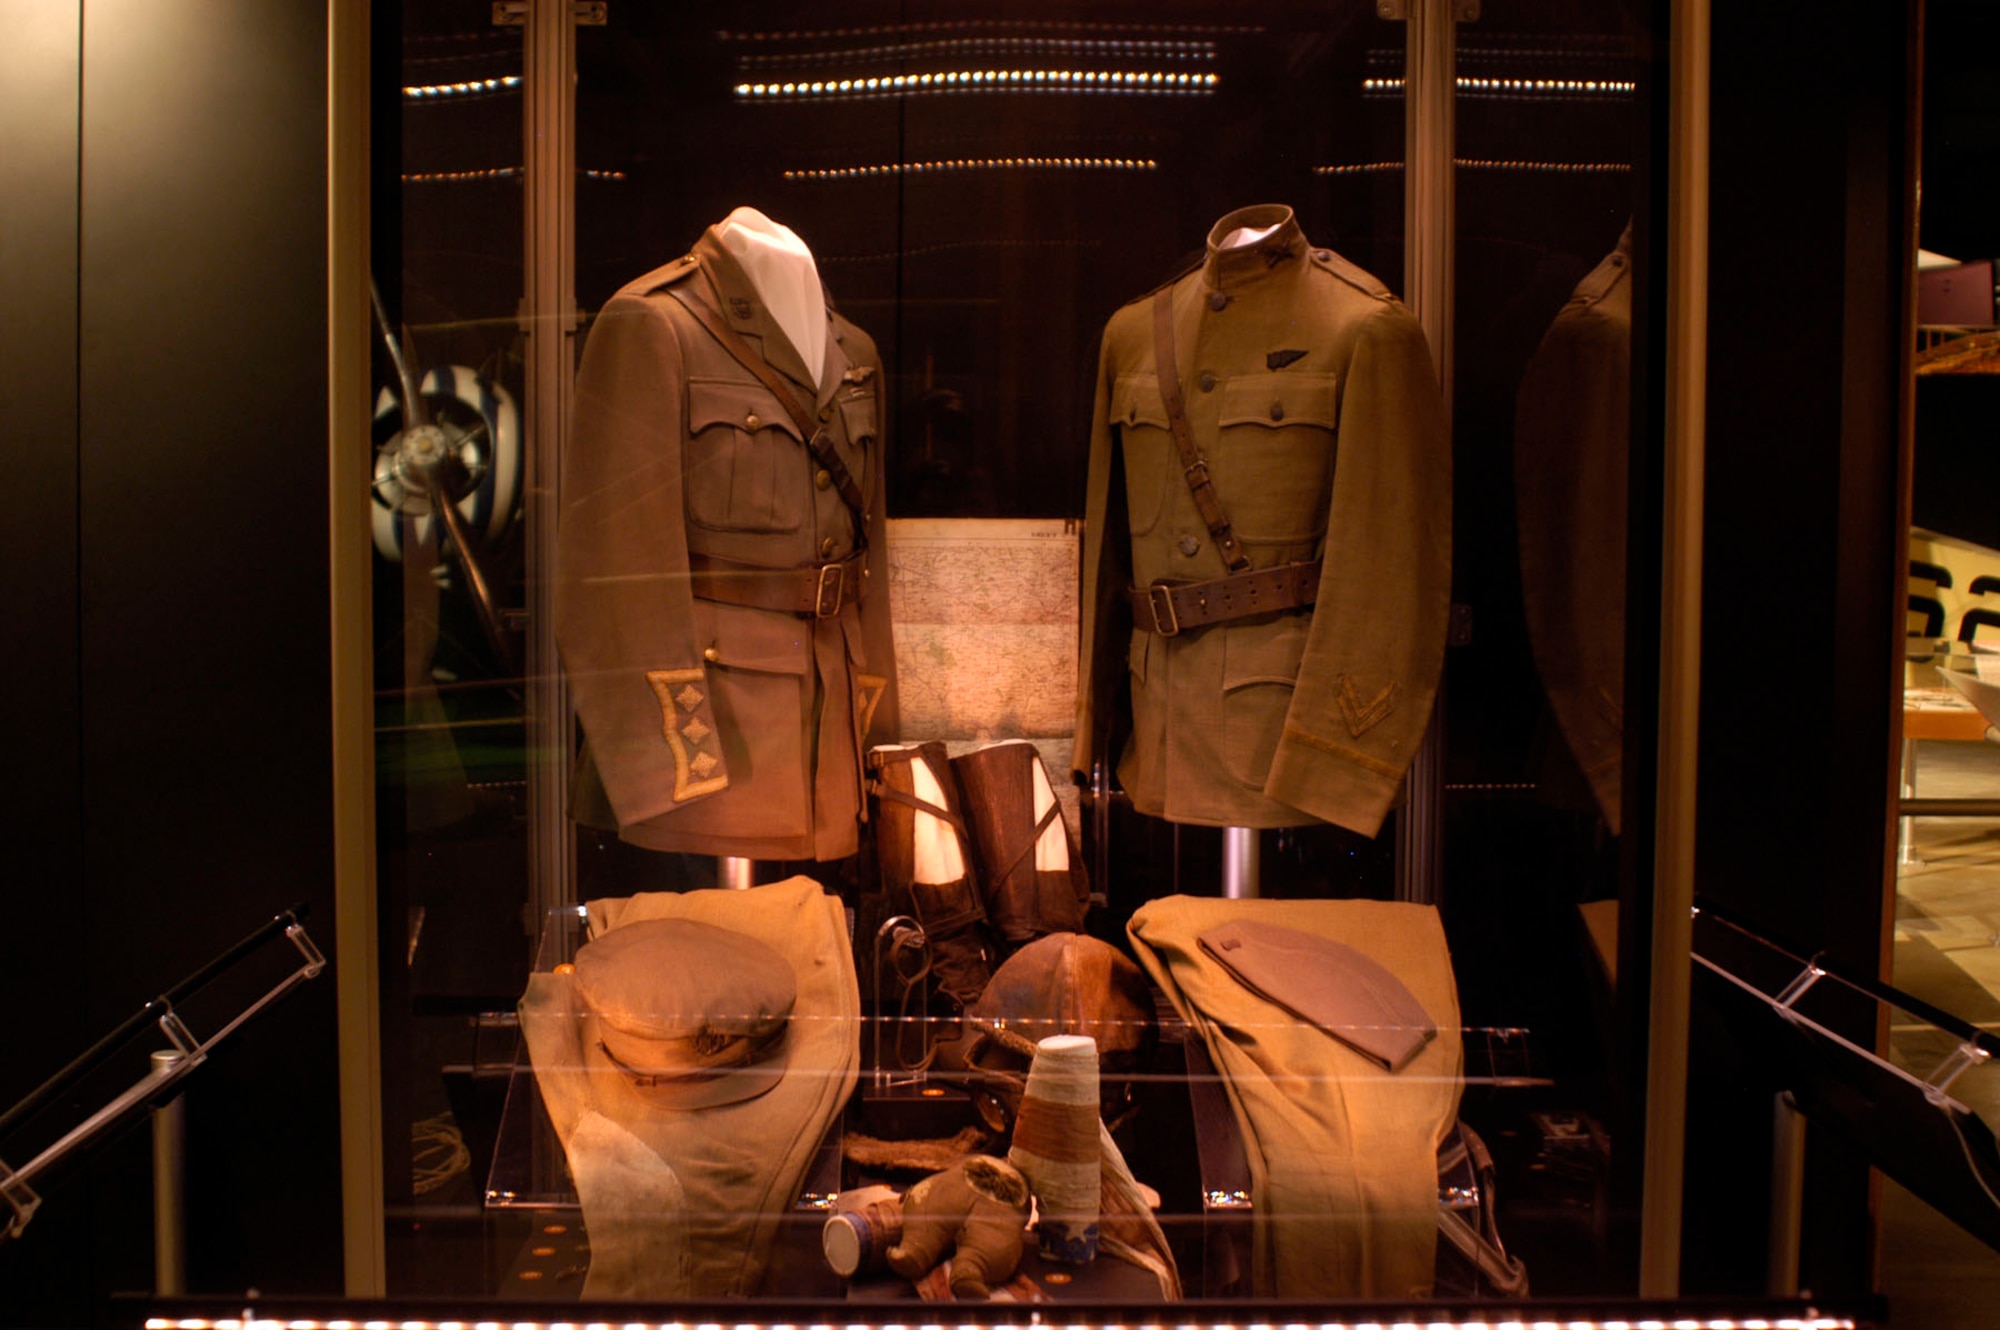 DAYTON, Ohio - (Left) British Royal Flying Corp cap, tunic, trousers and flying equipment worn by Capt. William C. Lambert during World War I. The bar decoration below the RFC wings on the tunic was the ribbon design for the original British Distinguished Flying Cross. (Right) Uniform items worn by Lt. Stephen W. Thompson on Feb. 5, 1918, when, while flying as an observer with the French, he became the first person in U.S. uniform to down an enemy airplane. (U.S. Air Force photo)